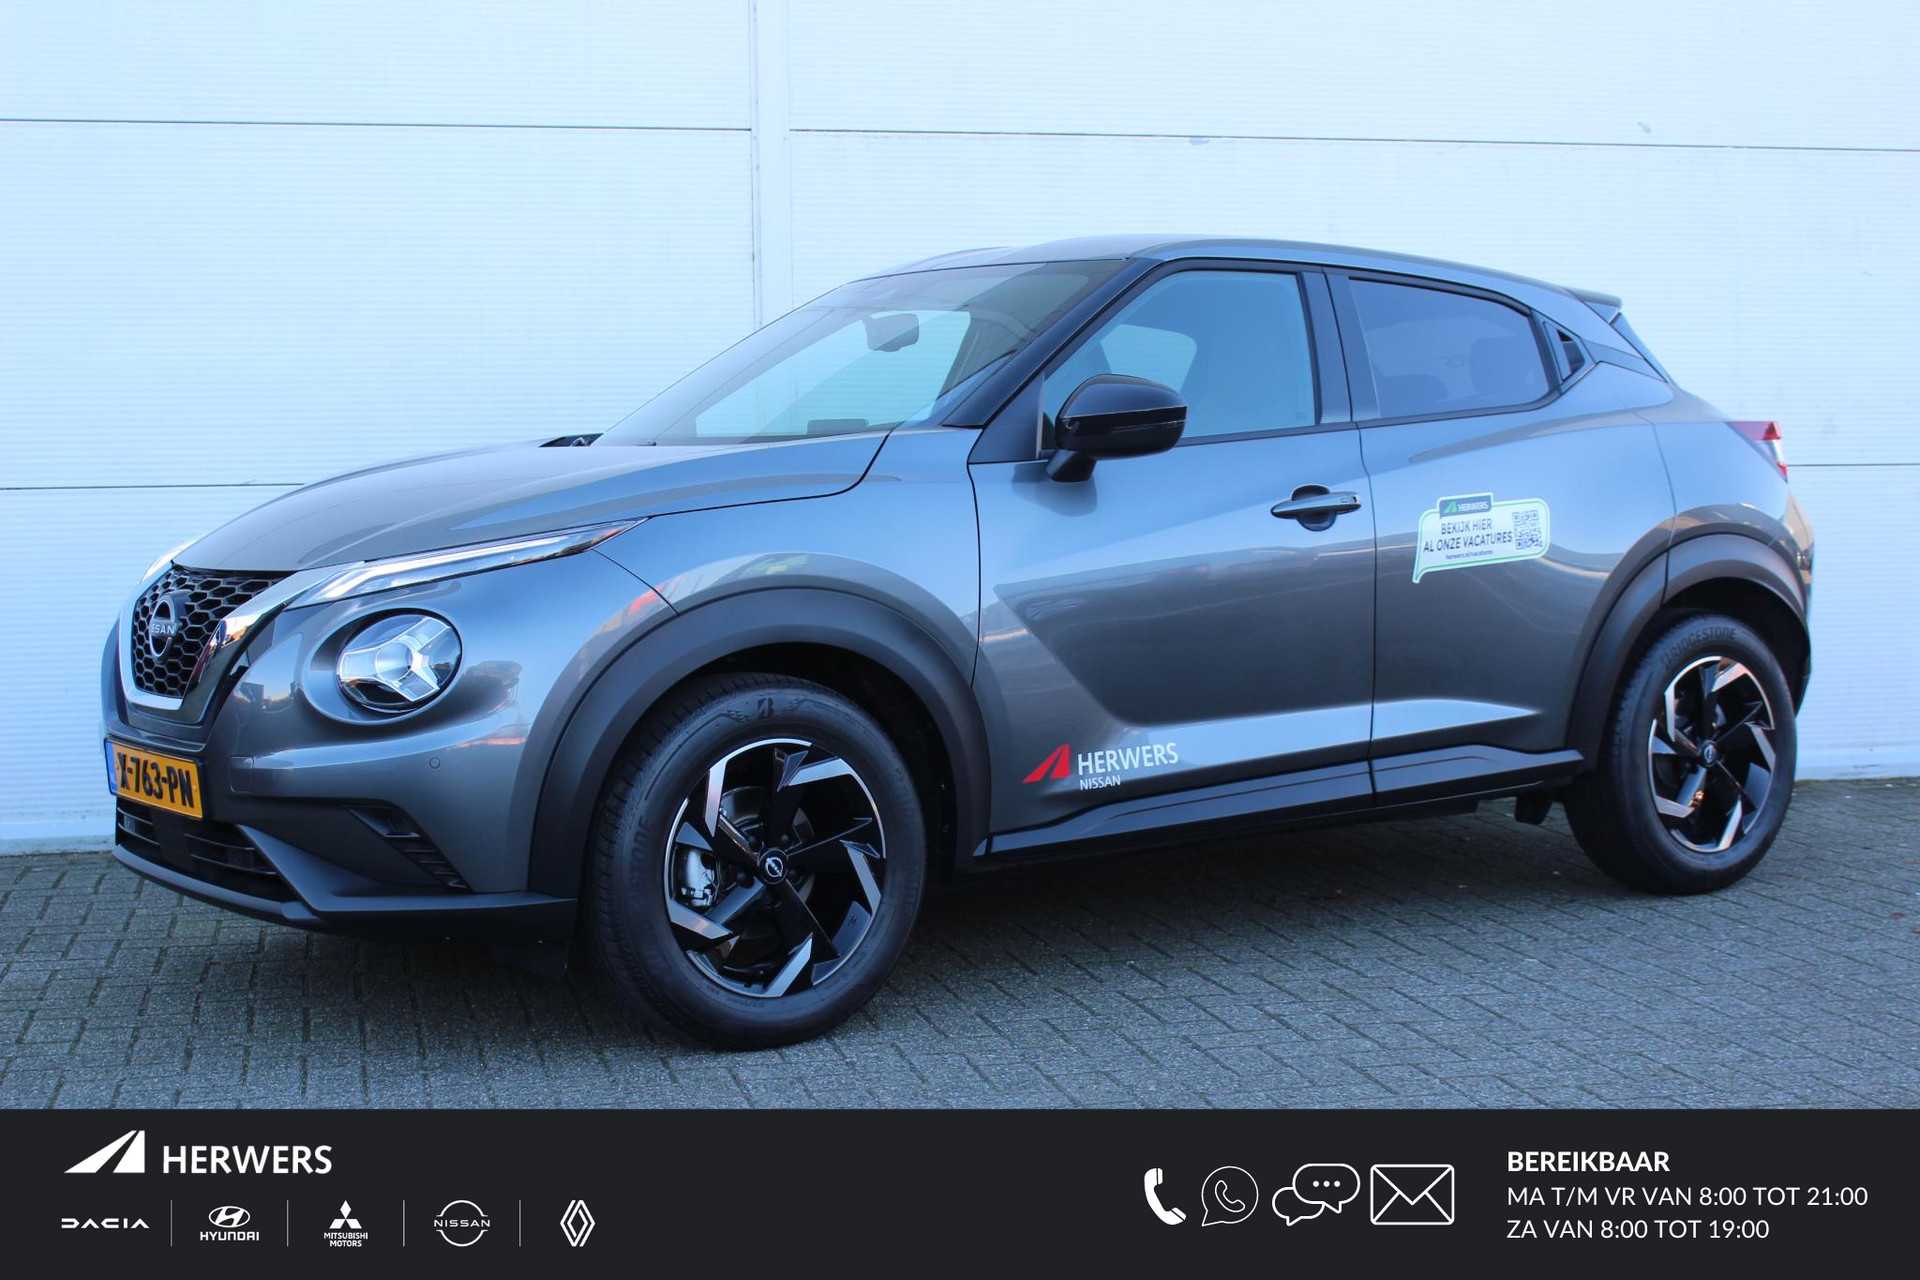 Nissan Juke 1.0 DIG-T 114 N-Connecta / Apple Carplay/Android Auto / Climate Control / Cruise Control / Achteruitrijcamera / Keyless Entry & Start / bij viaBOVAG.nl